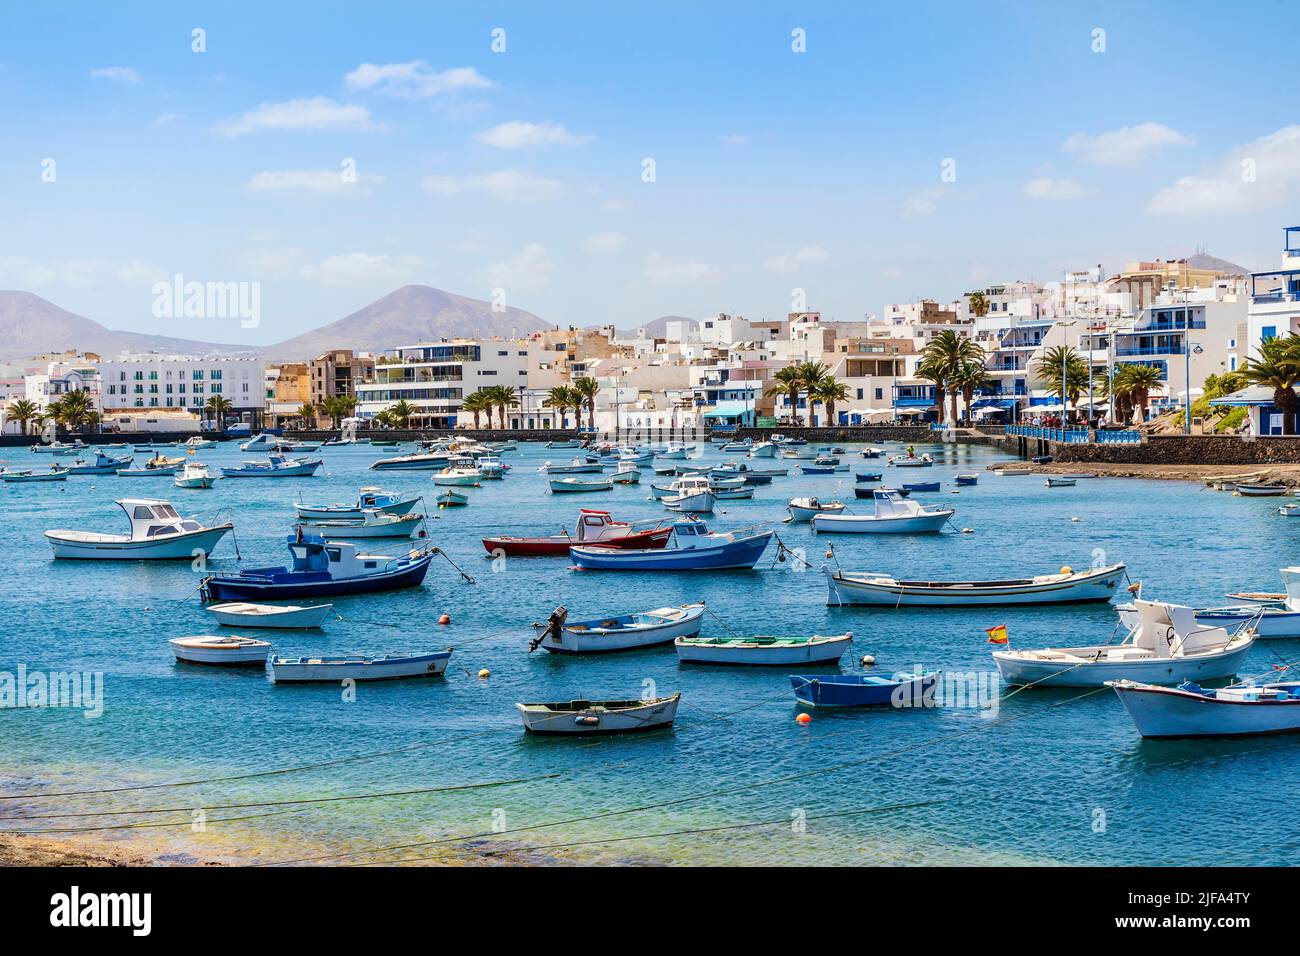 Beautiful seaside downtown of Arrecife with many boats floating on blue water, Lanzarote, Canary Islands, Spain Stock Photo